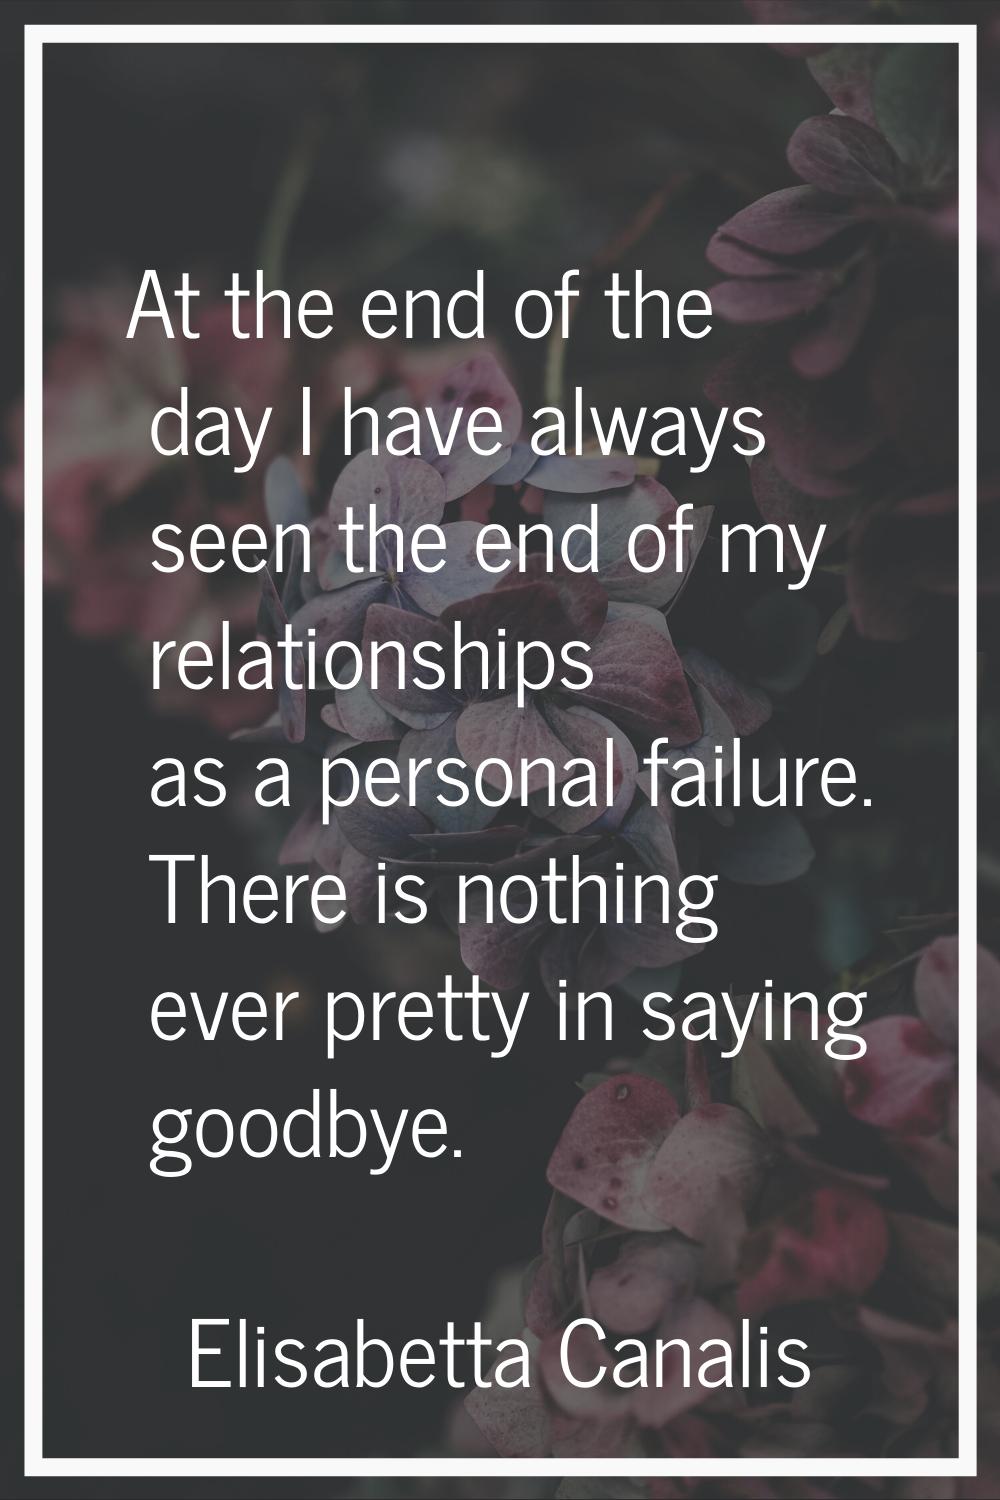 At the end of the day I have always seen the end of my relationships as a personal failure. There i